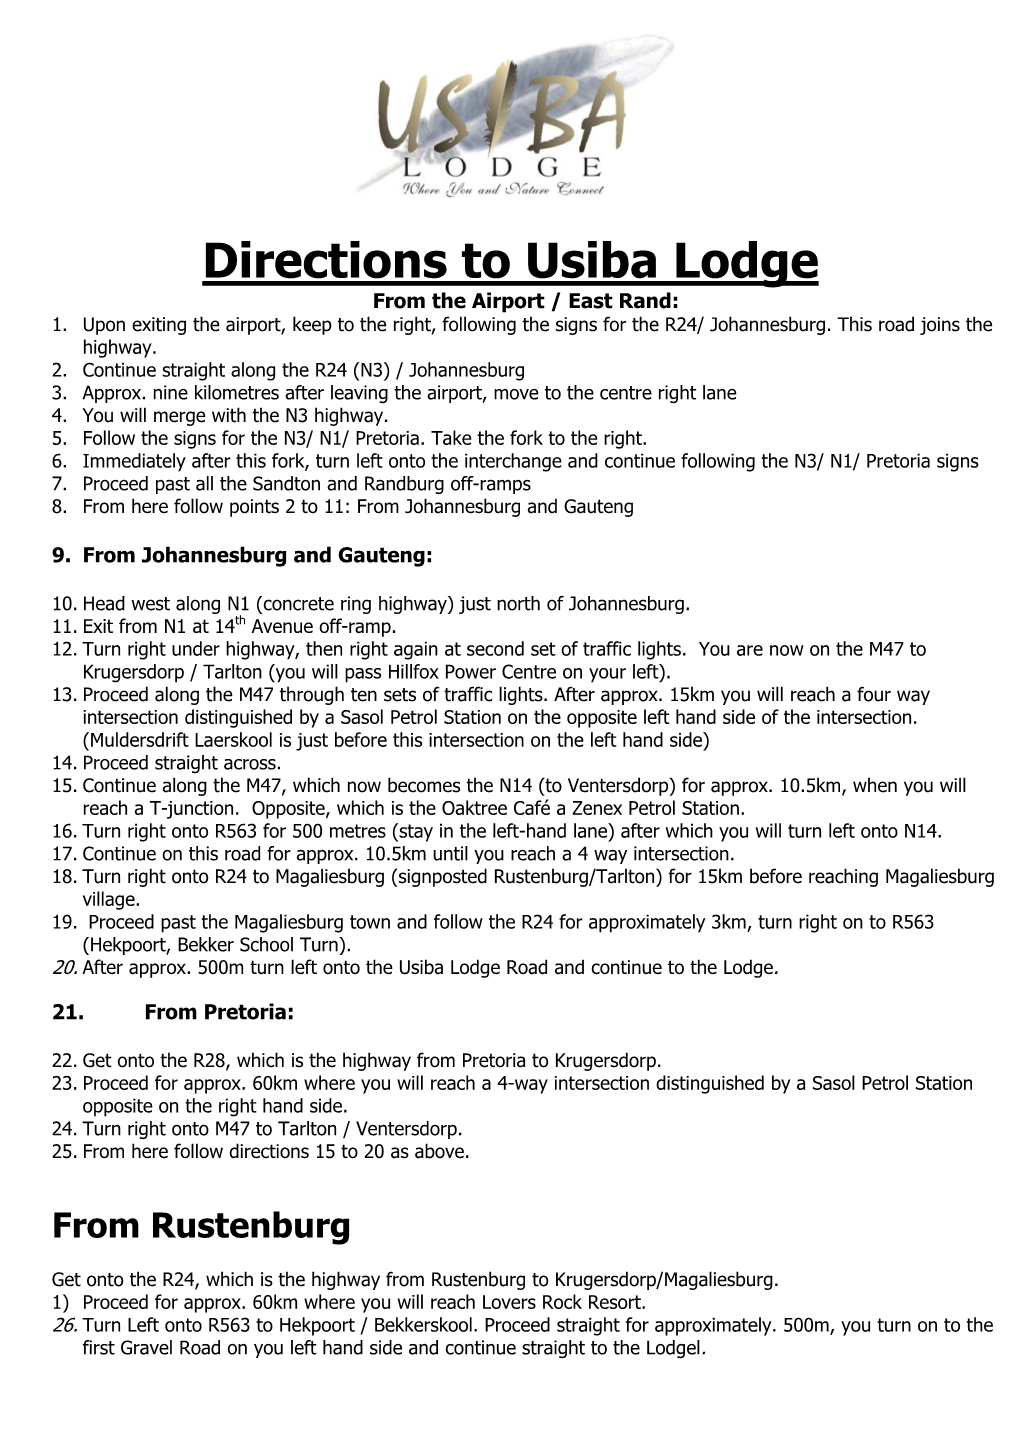 Directions to Usiba Lodge from the Airport / East Rand: 1